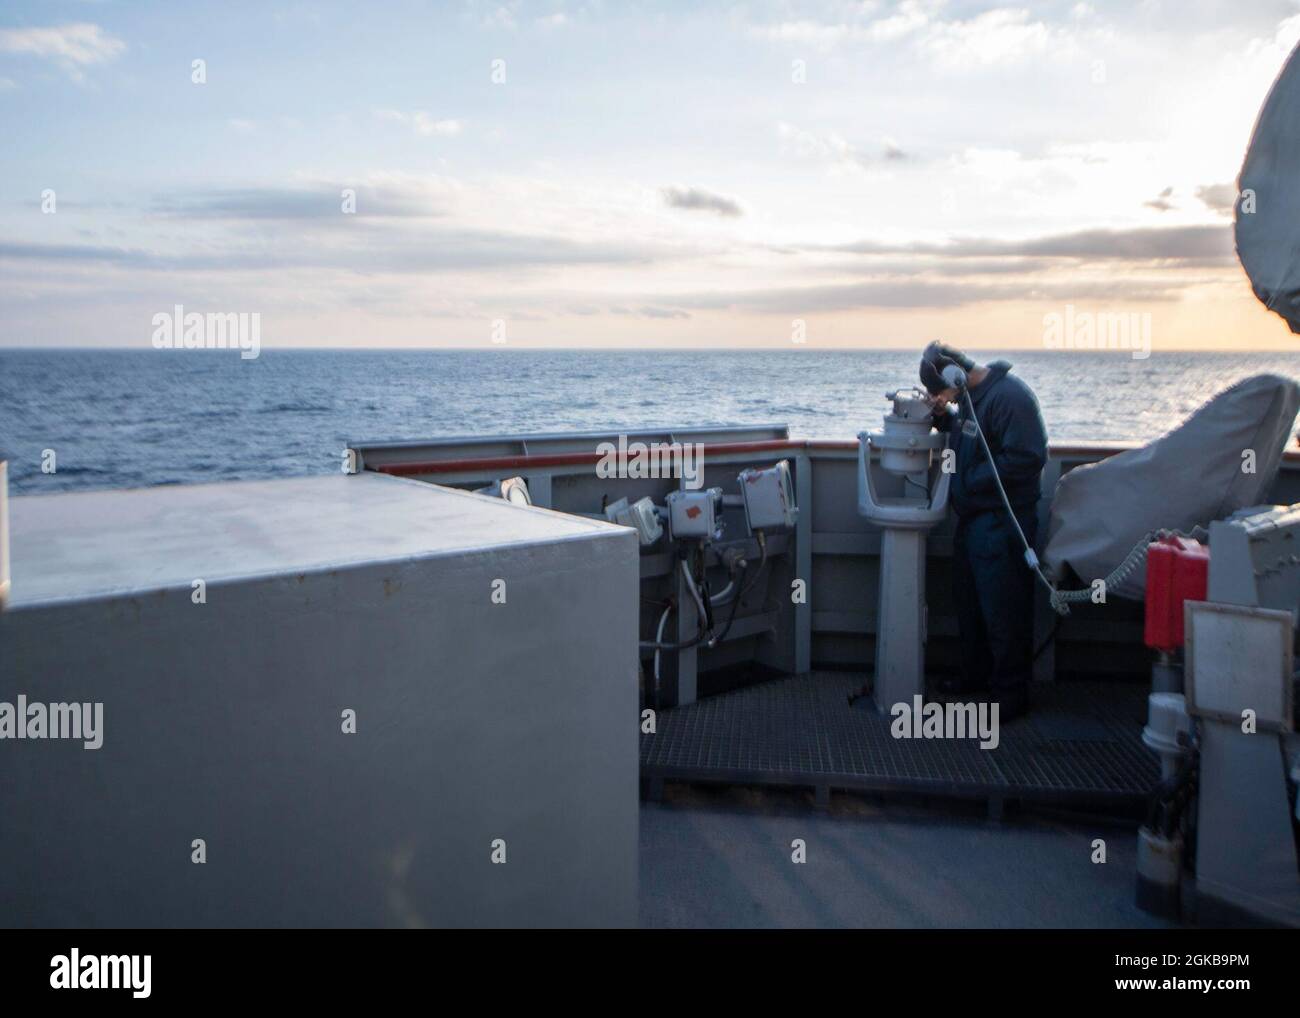 210303-N-RG171-0043 MEDITERRANEAN SEA (Mar. 3, 2021) Seaman Onyx Martinezmaldinado looks through a telescopic alidade on the bridge of the Arleigh Burke-class guided-missile destroyer USS Donald Cook (DDG 75), Mar. 3, 2021. Donald Cook, forward-deployed to Rota, Spain, is on patrol in the U.S. Sixth Fleet area of operations in support of regional allies and partners and U.S. national security in Europe and Africa. Stock Photo